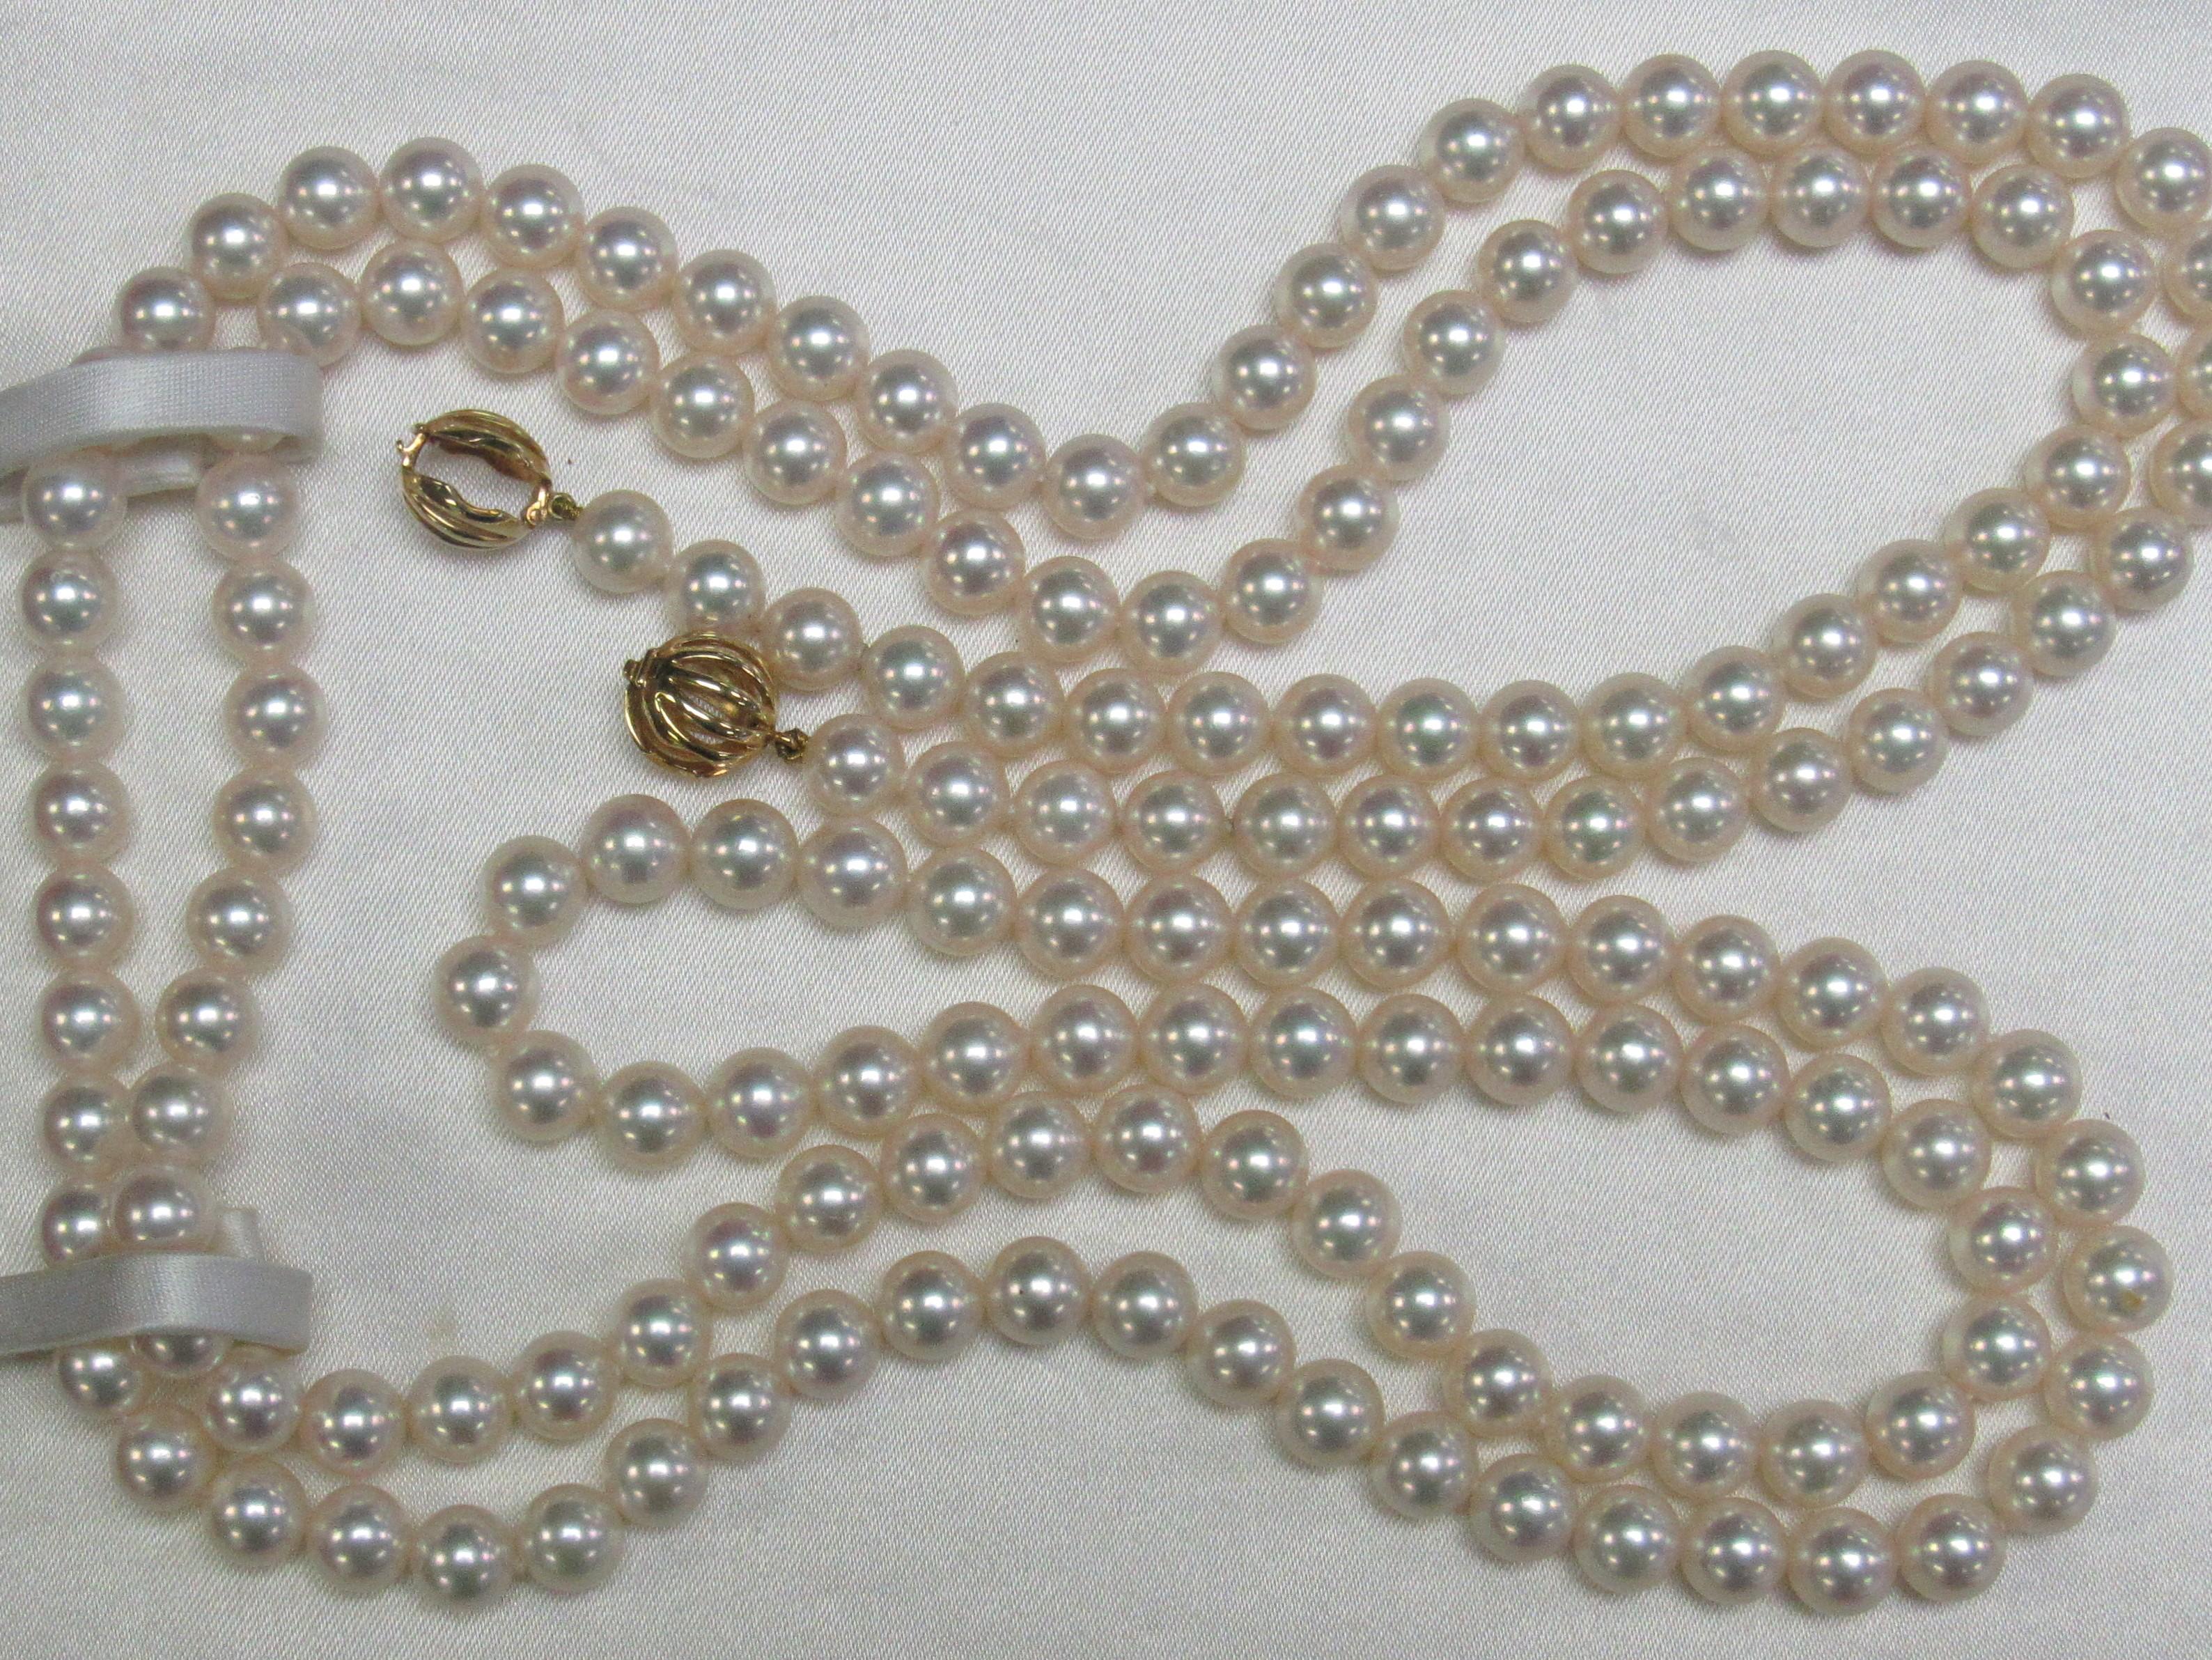 Mikimoto Akoya cultured pearl rope strand, length 51", 171 round 7.0-7.5mm